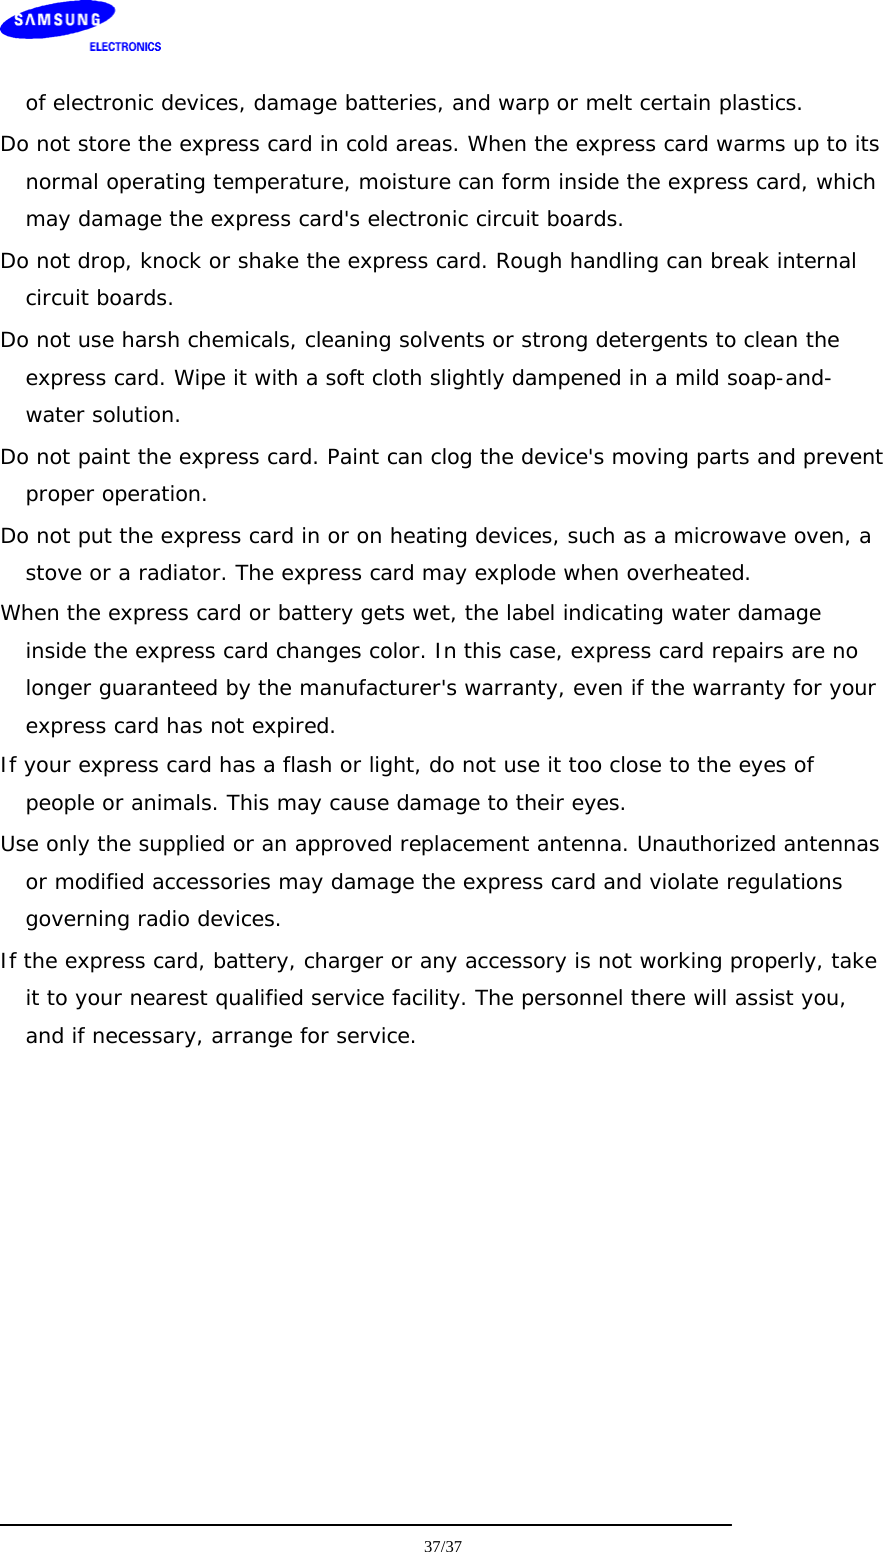    of electronic devices, damage batteries, and warp or melt certain plastics. Do not store the express card in cold areas. When the express card warms up to its normal operating temperature, moisture can form inside the express card, which may damage the express card&apos;s electronic circuit boards. Do not drop, knock or shake the express card. Rough handling can break internal circuit boards. Do not use harsh chemicals, cleaning solvents or strong detergents to clean the express card. Wipe it with a soft cloth slightly dampened in a mild soap-and-water solution. Do not paint the express card. Paint can clog the device&apos;s moving parts and prevent proper operation. Do not put the express card in or on heating devices, such as a microwave oven, a stove or a radiator. The express card may explode when overheated. When the express card or battery gets wet, the label indicating water damage inside the express card changes color. In this case, express card repairs are no longer guaranteed by the manufacturer&apos;s warranty, even if the warranty for your express card has not expired.  If your express card has a flash or light, do not use it too close to the eyes of people or animals. This may cause damage to their eyes. Use only the supplied or an approved replacement antenna. Unauthorized antennas or modified accessories may damage the express card and violate regulations governing radio devices. If the express card, battery, charger or any accessory is not working properly, take it to your nearest qualified service facility. The personnel there will assist you, and if necessary, arrange for service.    37/37  